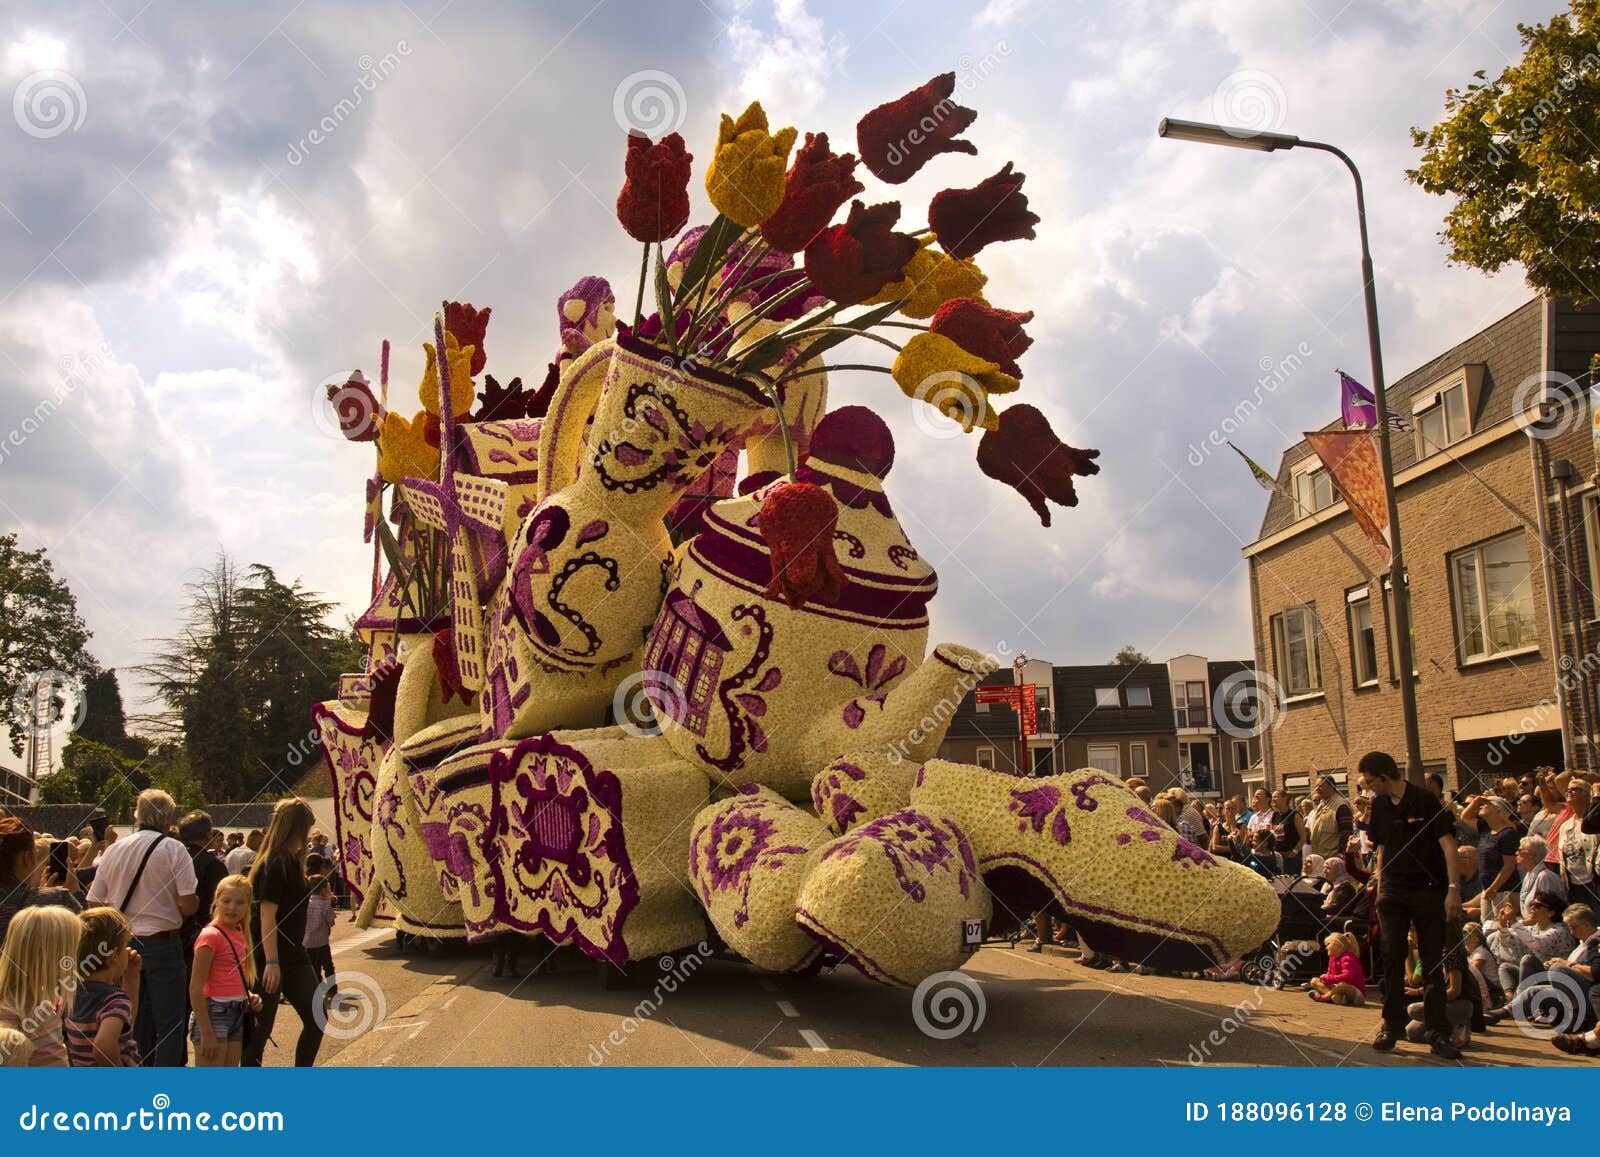 Flower Parade in Zundert, Netherlands. Editorial Stock Photo Image of